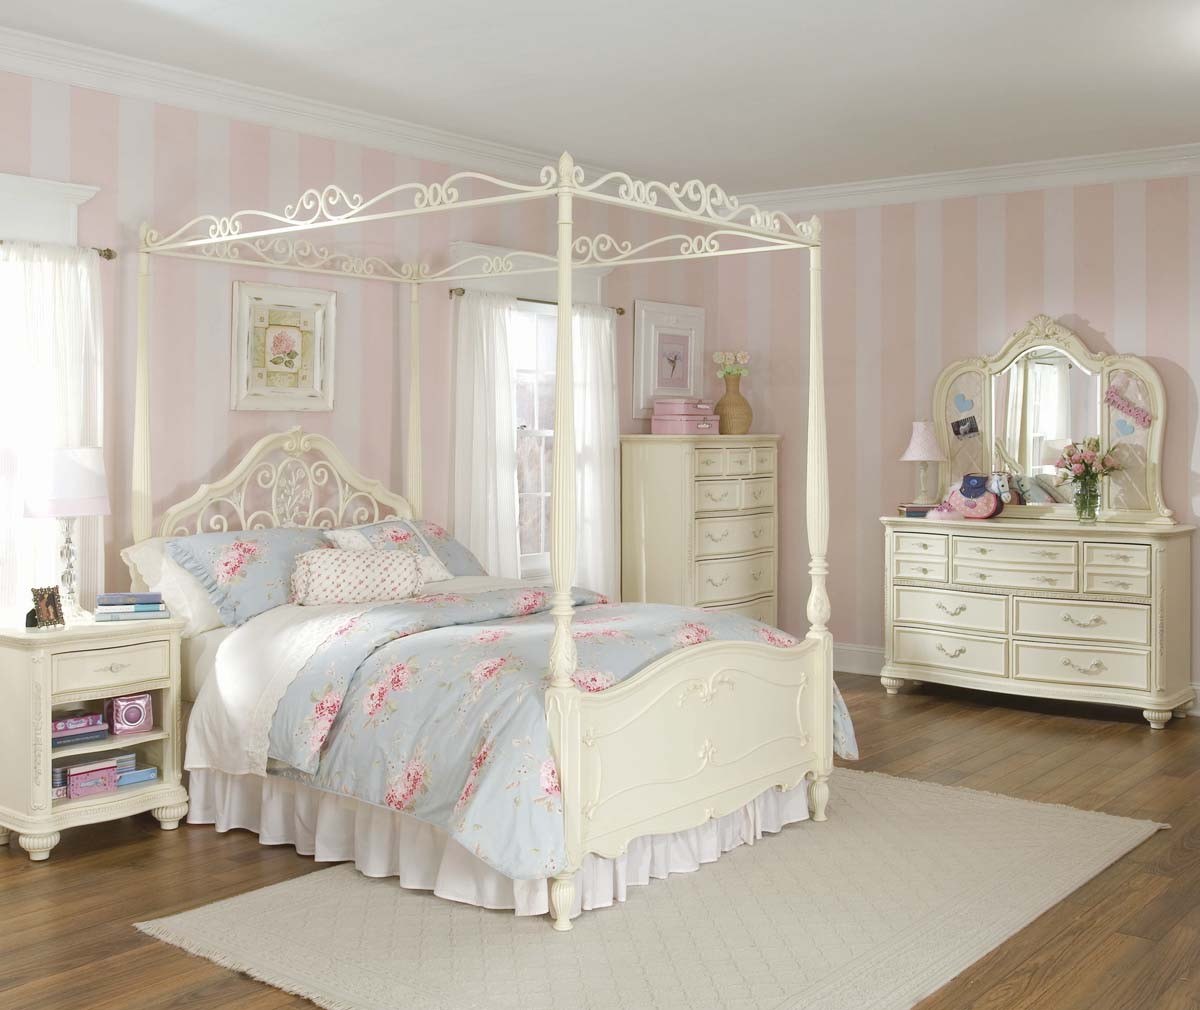 Kids White Bedroom Furniture
 25 Romantic and Modern Ideas for Girls Bedroom Sets